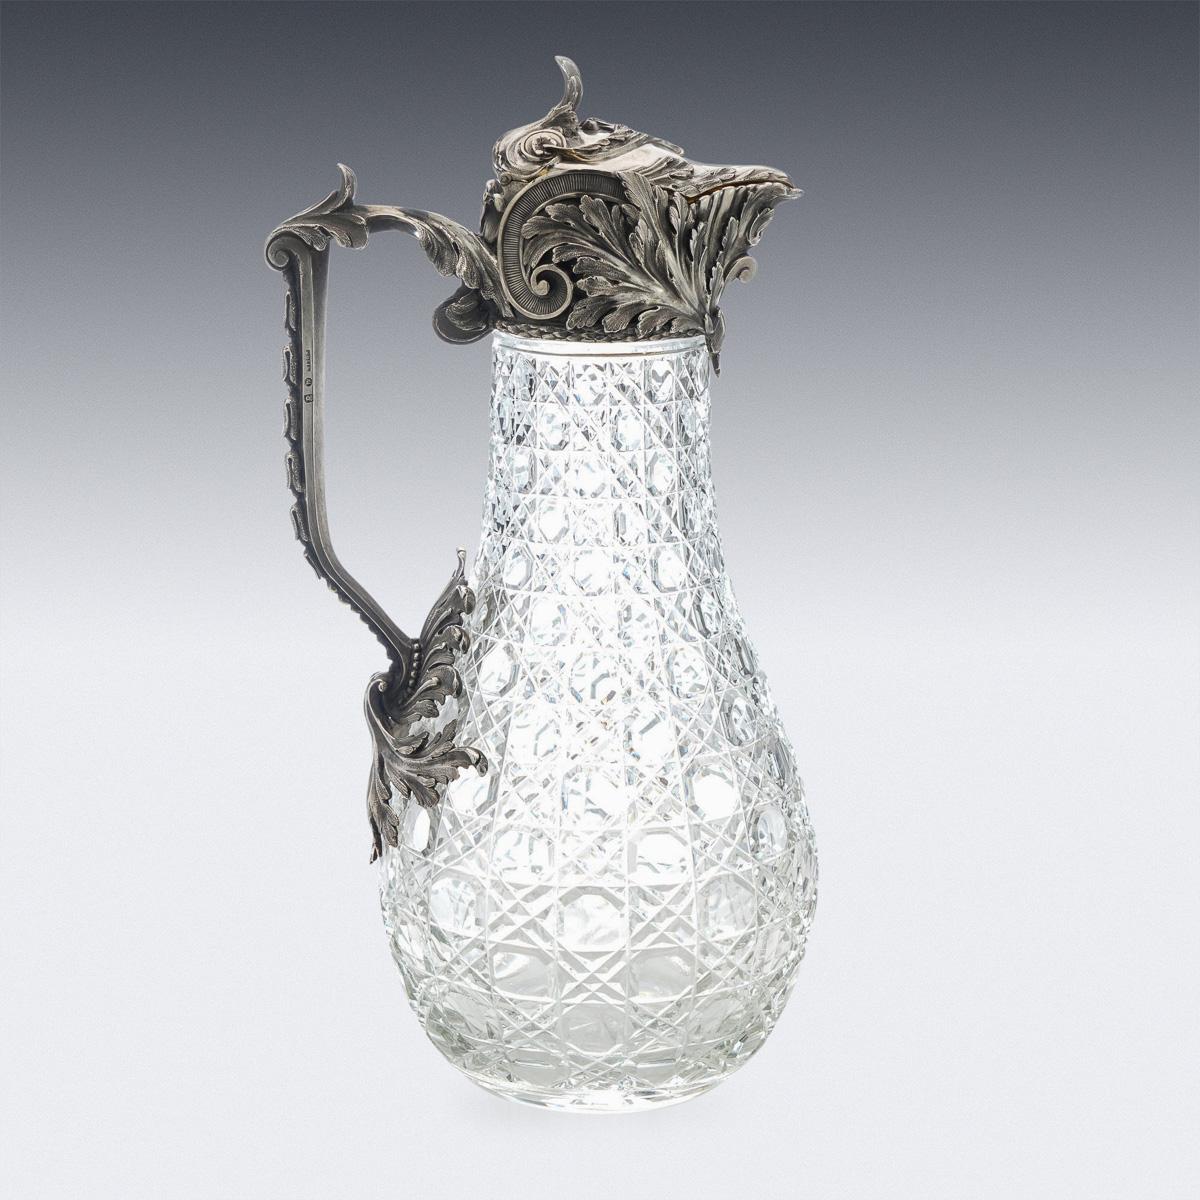 20th century Imperial Russian solid silver & cut glass claret jug, of baluster from with hob-nail cut-glass body, the mounts embossed with acanthus leaves and scrolls, applied with a shaped cast leaf-capped handle, hinged cover mounted with an leaf